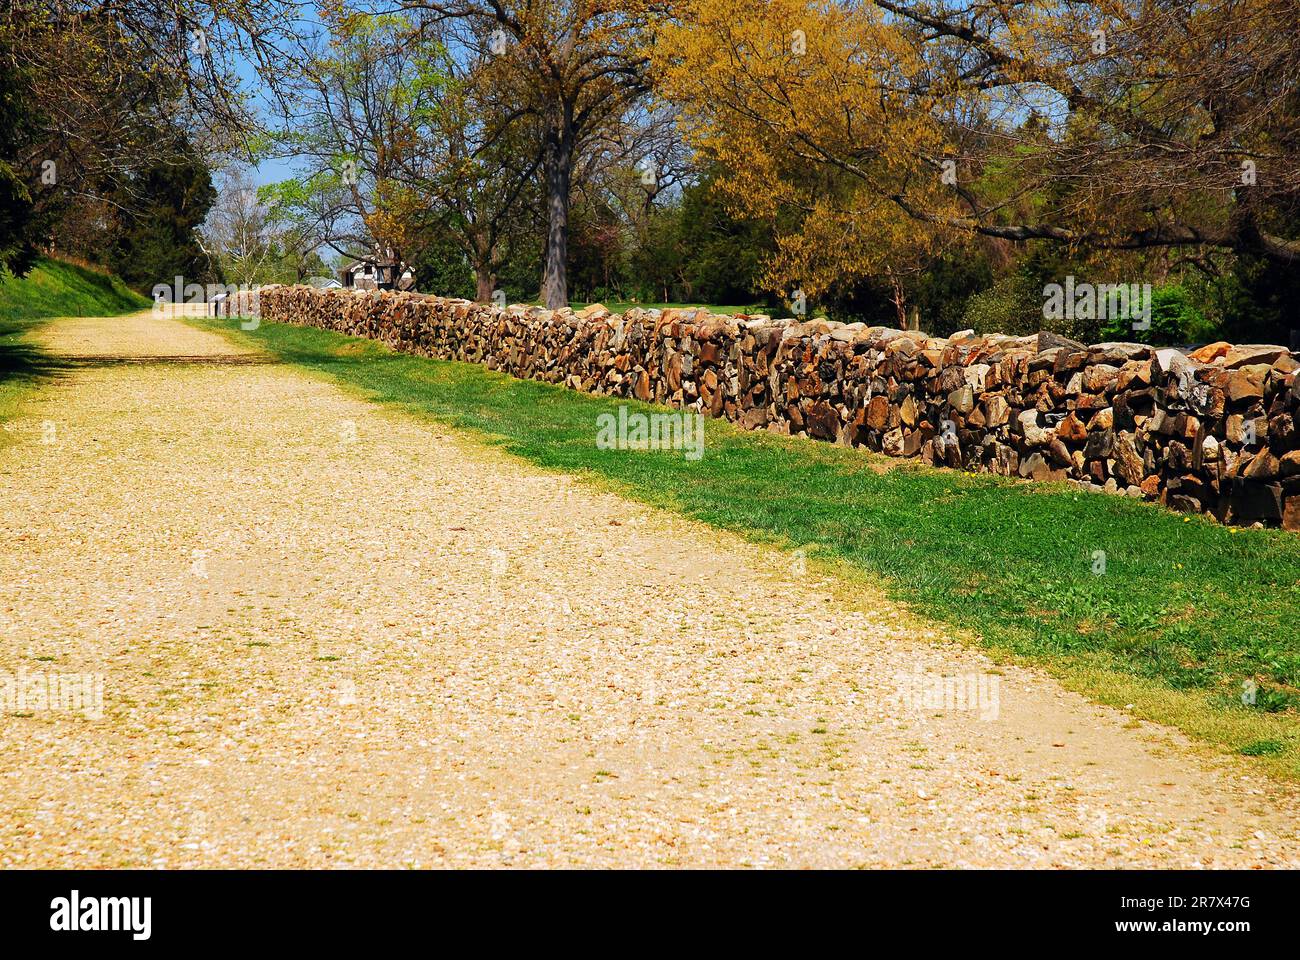 The Sunken Road and stone wall, where Confederate troops ambushed Union soldiers at the Battle of Fredericksburg during the American Civil War Stock Photo